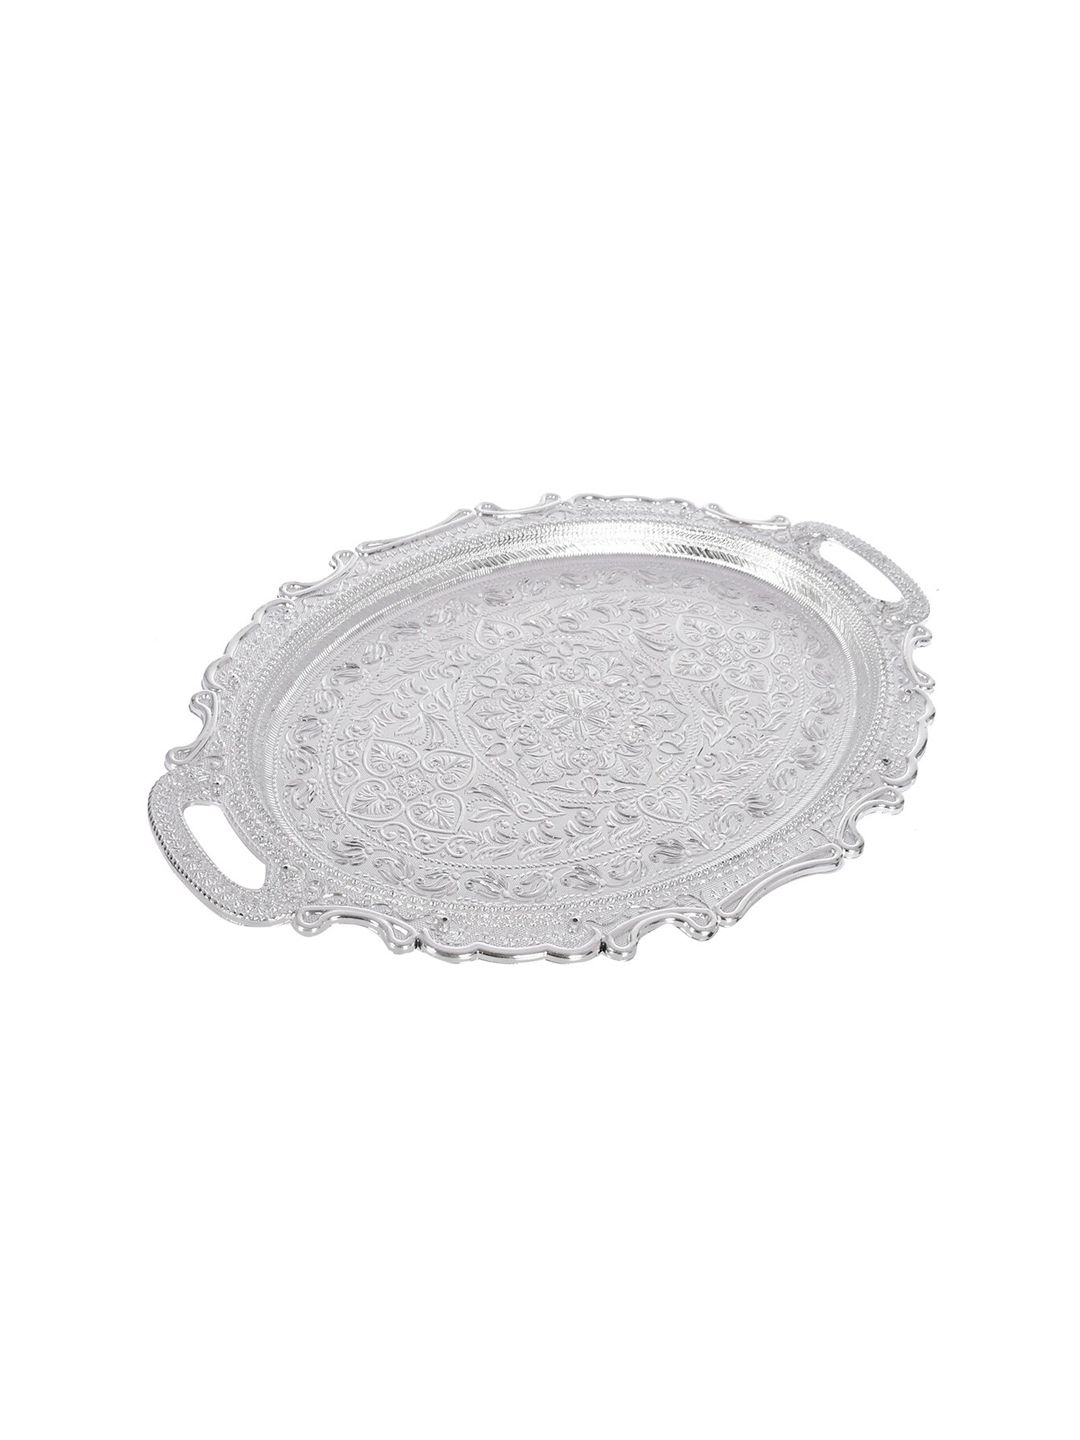 Kuber Industries Silver-Toned Traditional Design Serving Tray Price in India